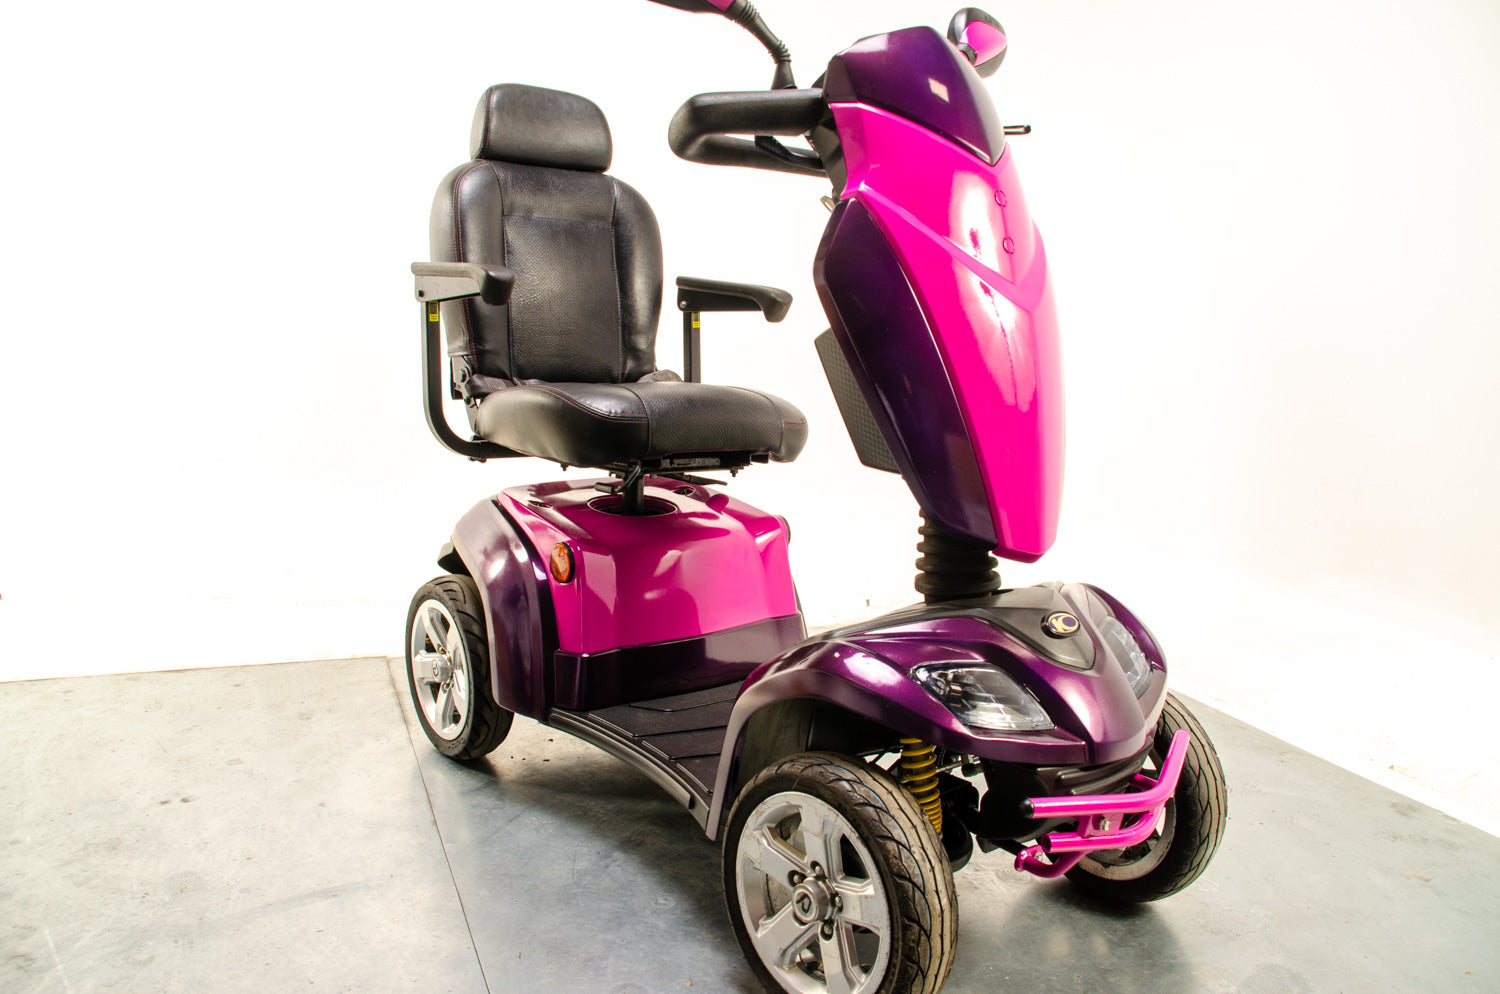 Kymco Agility Midsize Luxury Mobility Scooter 8mph Pink Purple